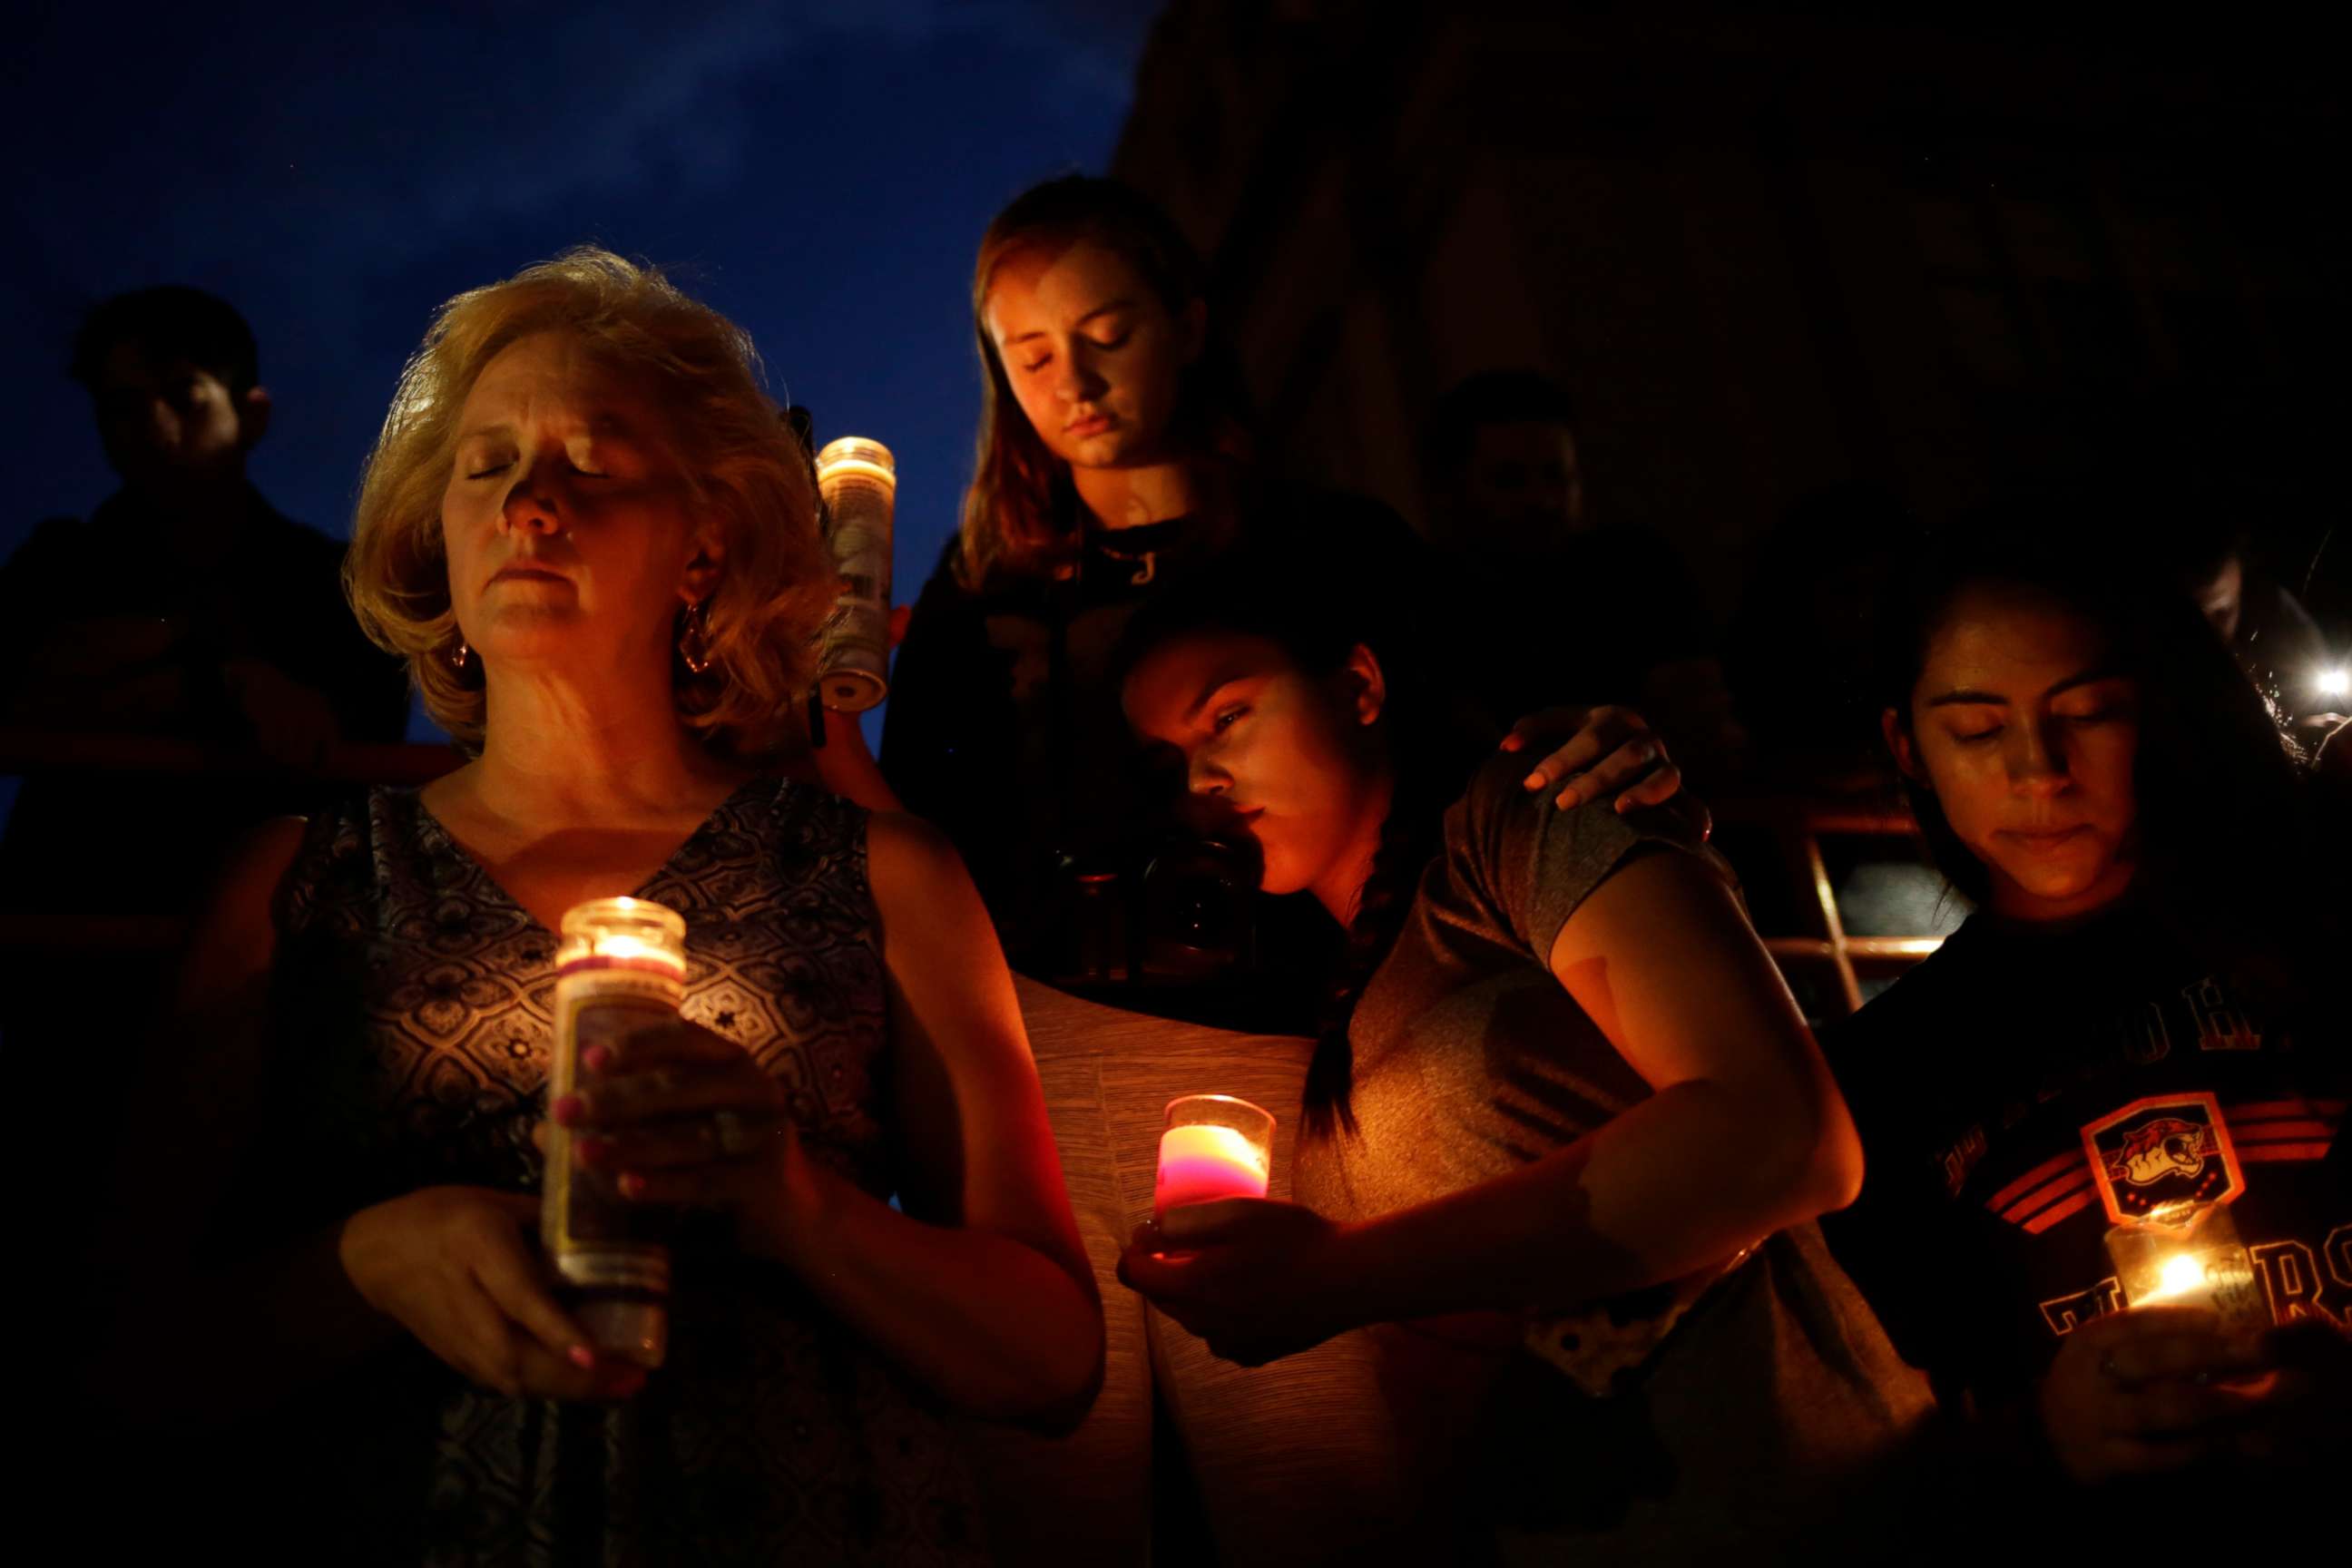 PHOTO: Mourners take part in a vigil at El Paso High School after a mass shooting at a Walmart store in El Paso, Texas, Aug. 3, 2019.